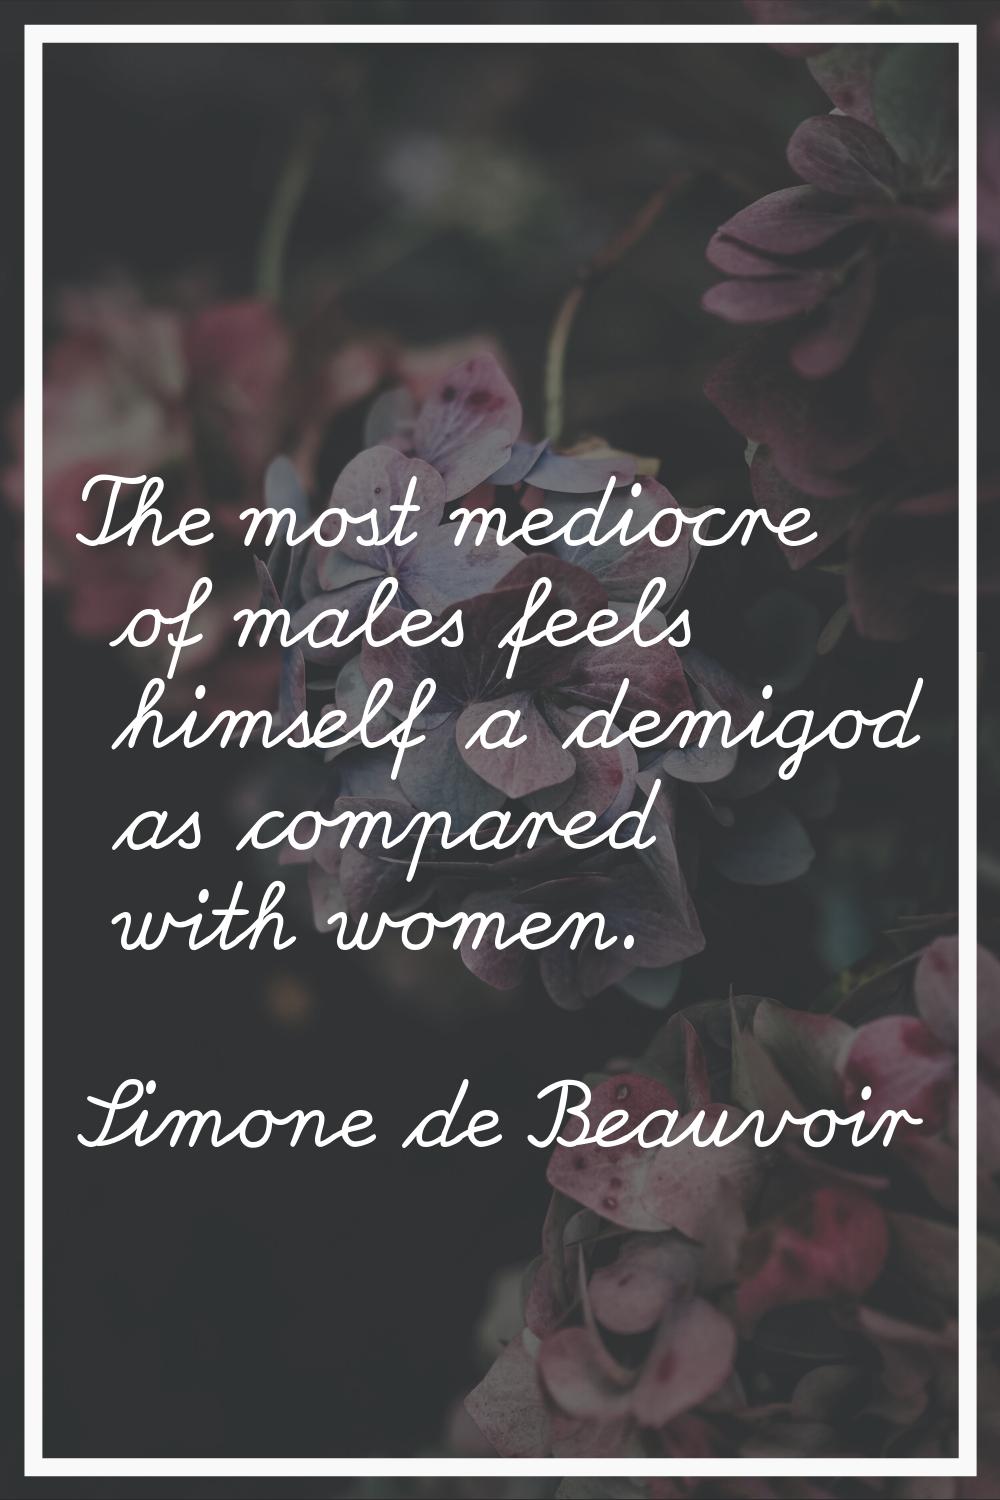 The most mediocre of males feels himself a demigod as compared with women.